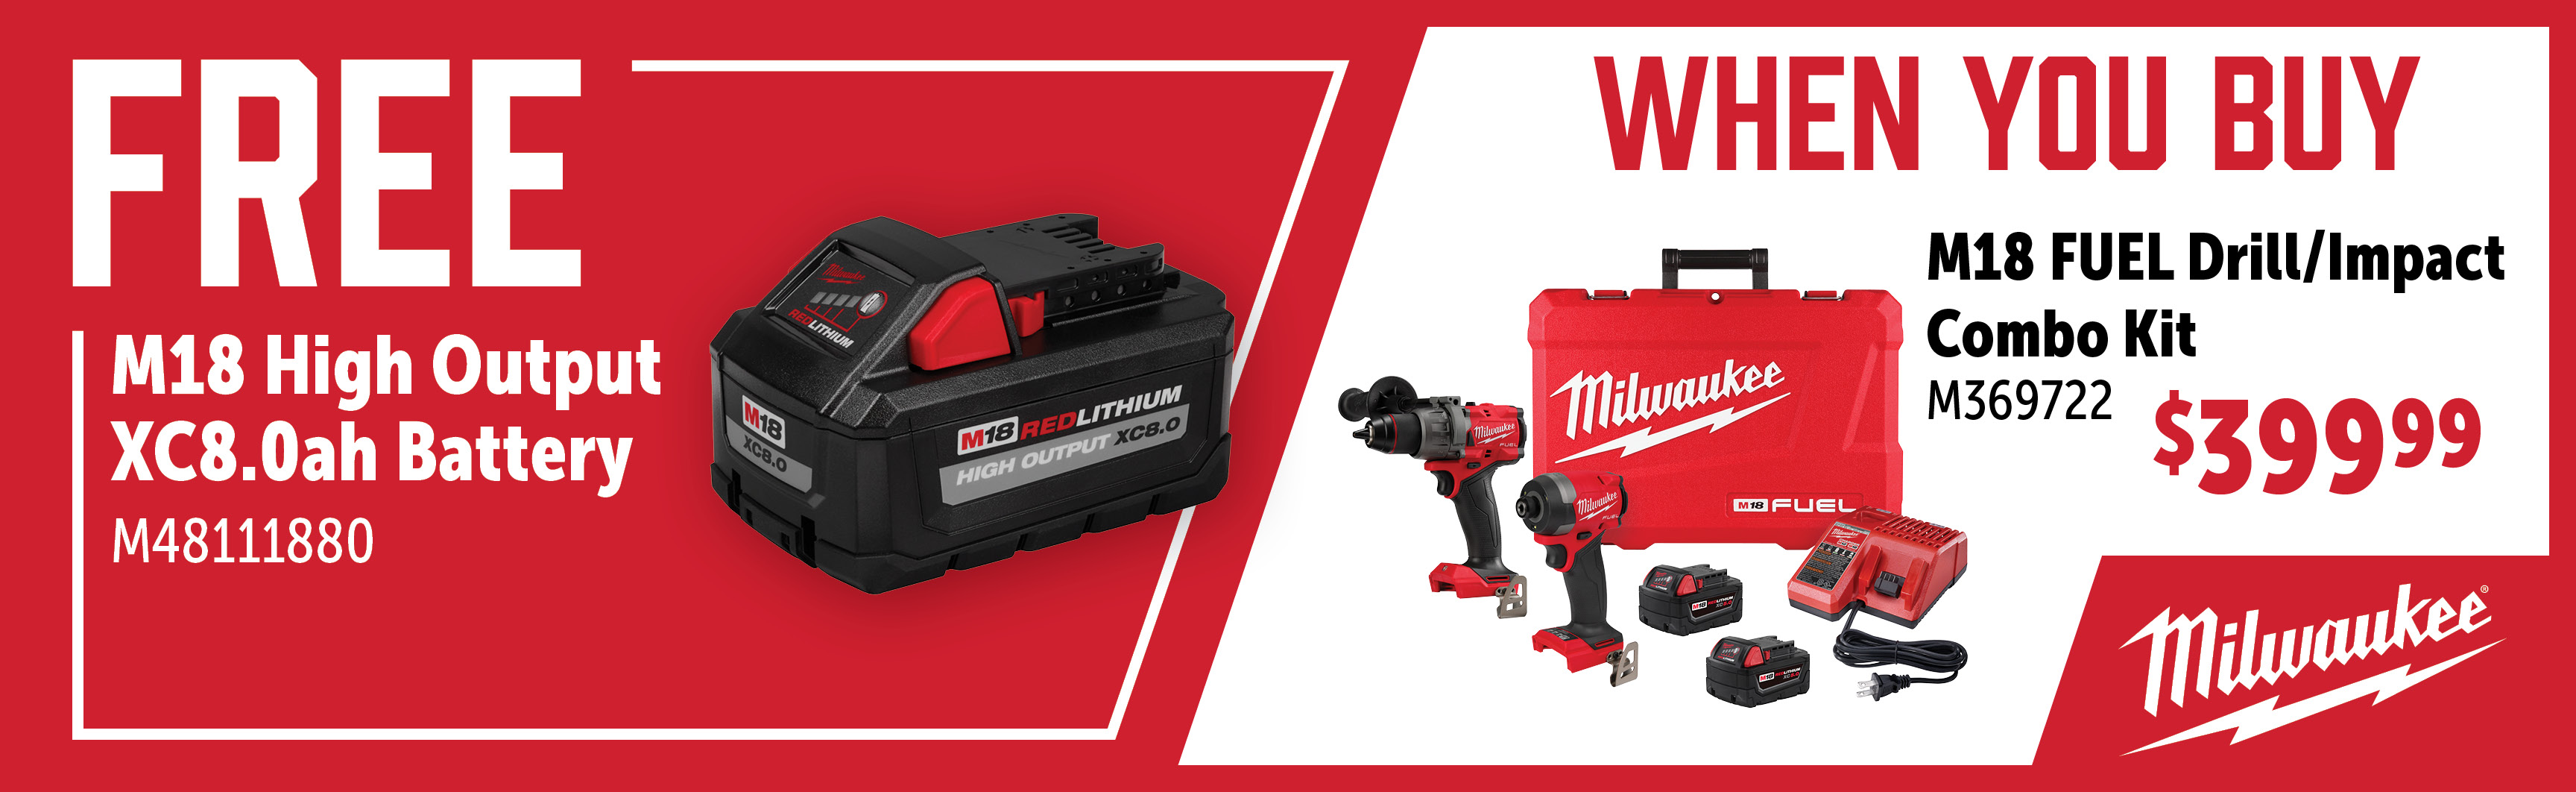 Milwaukee Feb-Apr: Buy an M369722 and Get a FREE M48111880